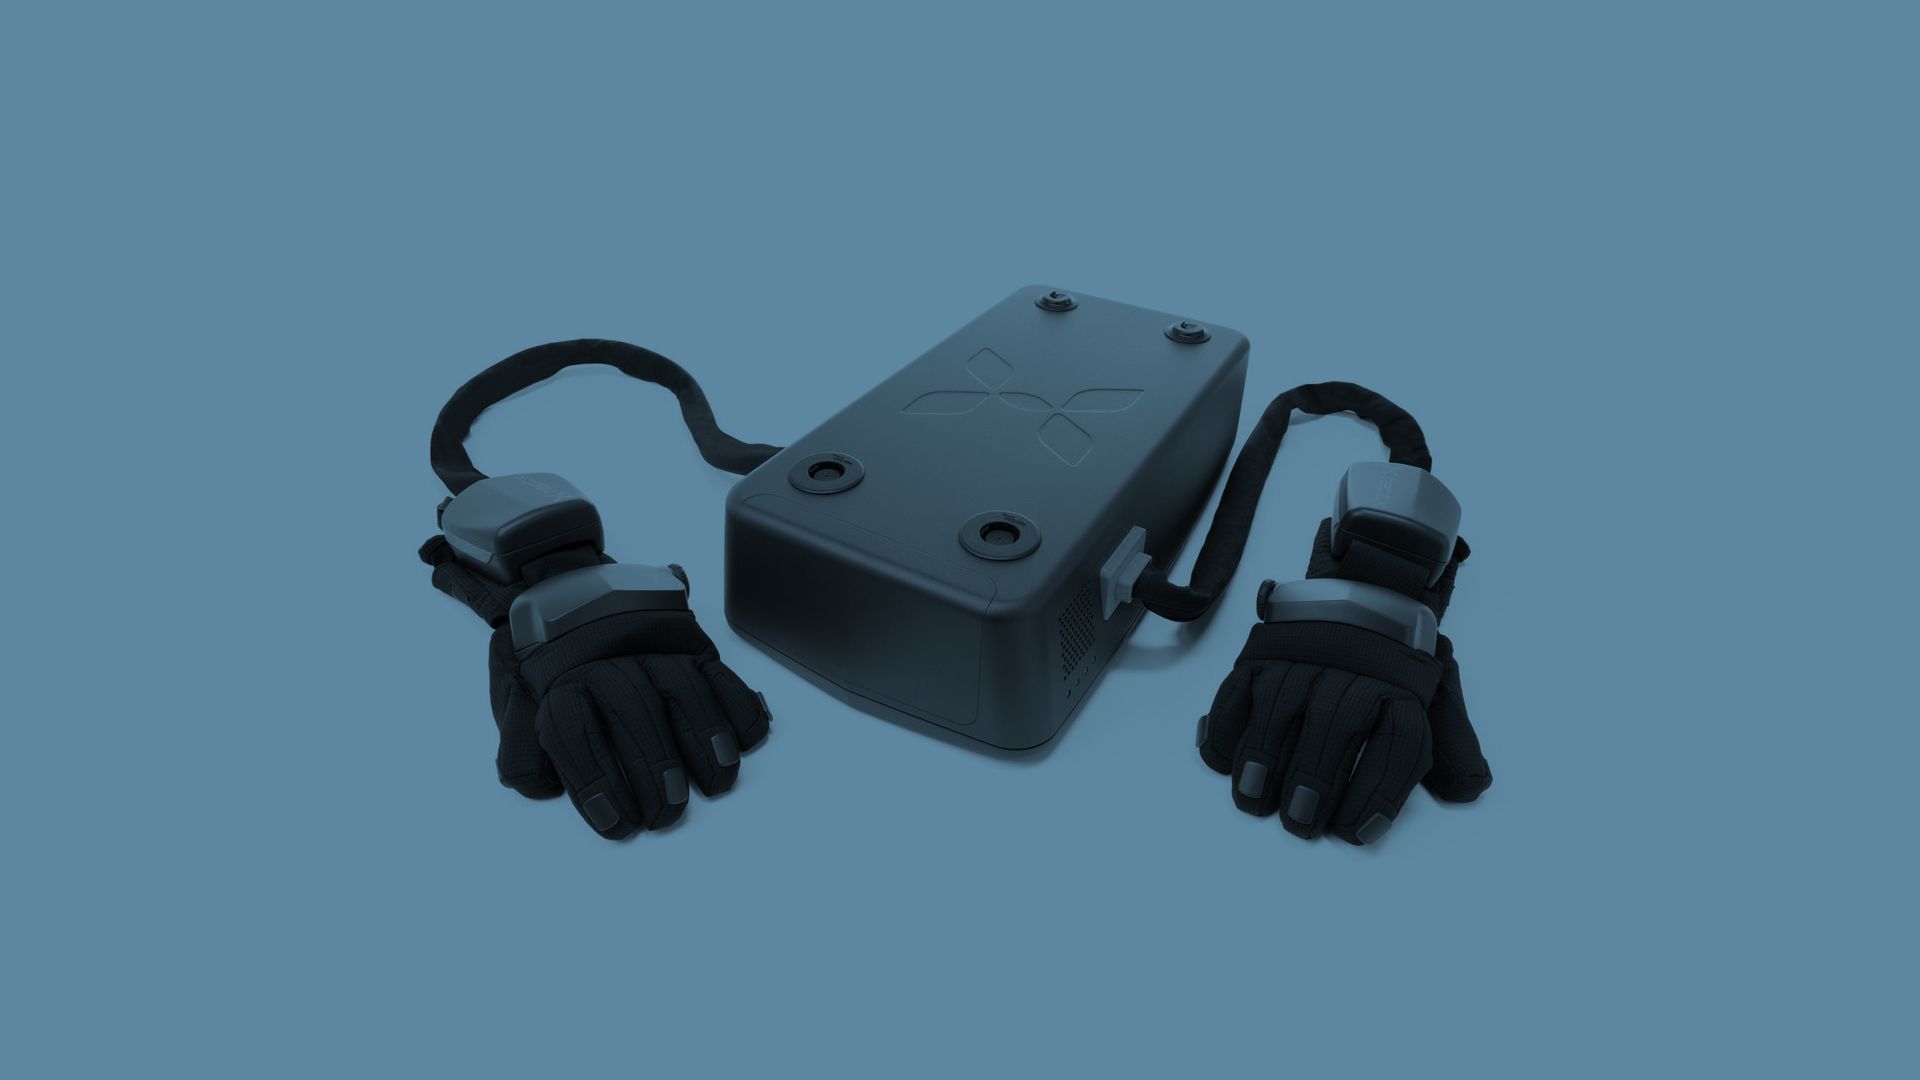 A header image: a photo of HaptX's G1 gloves connected to an Airpack unit.